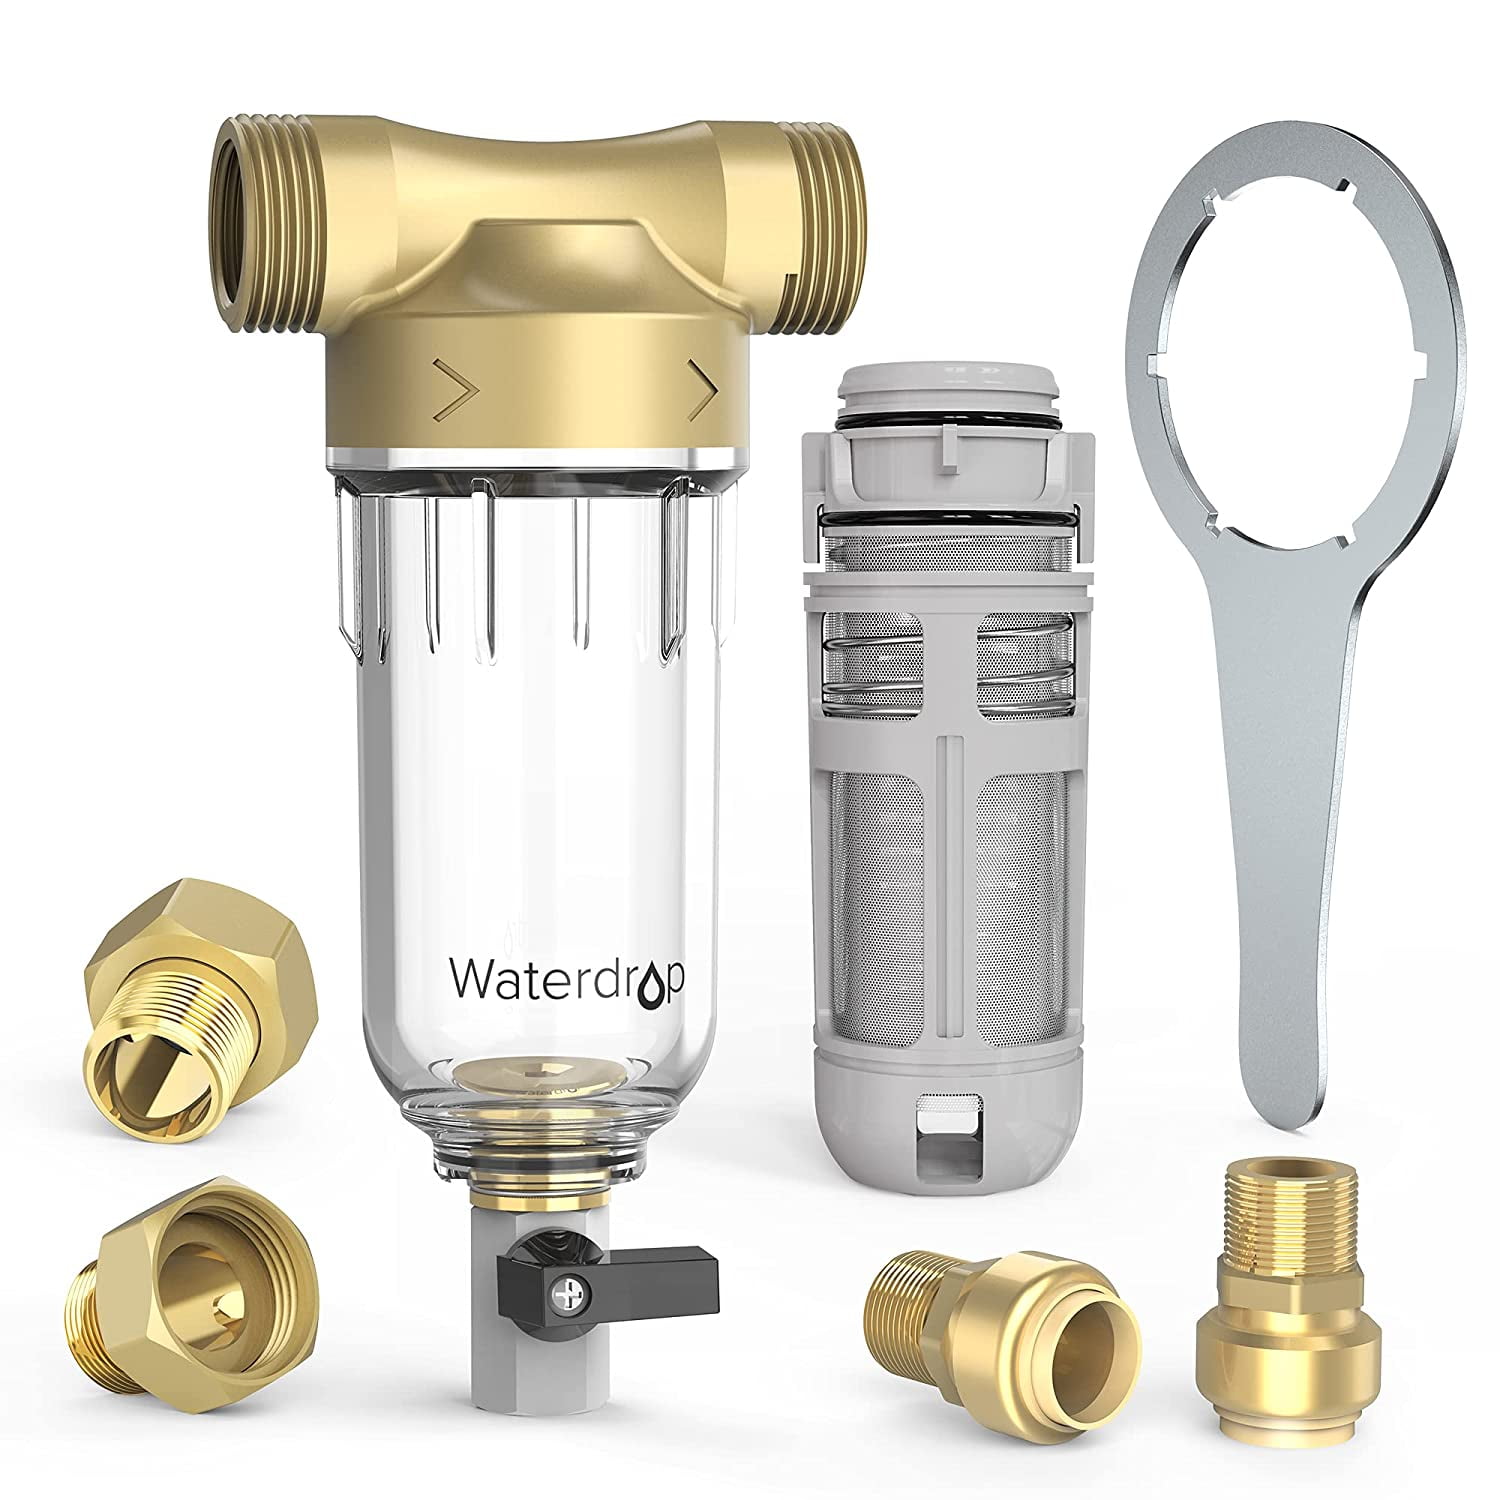 wayclound Water Pre-Filter Sediment Filter 40 Micron Whole House Reusable Spin Down Sediment Filter System 1/2 FNPT 3/4 MNPT